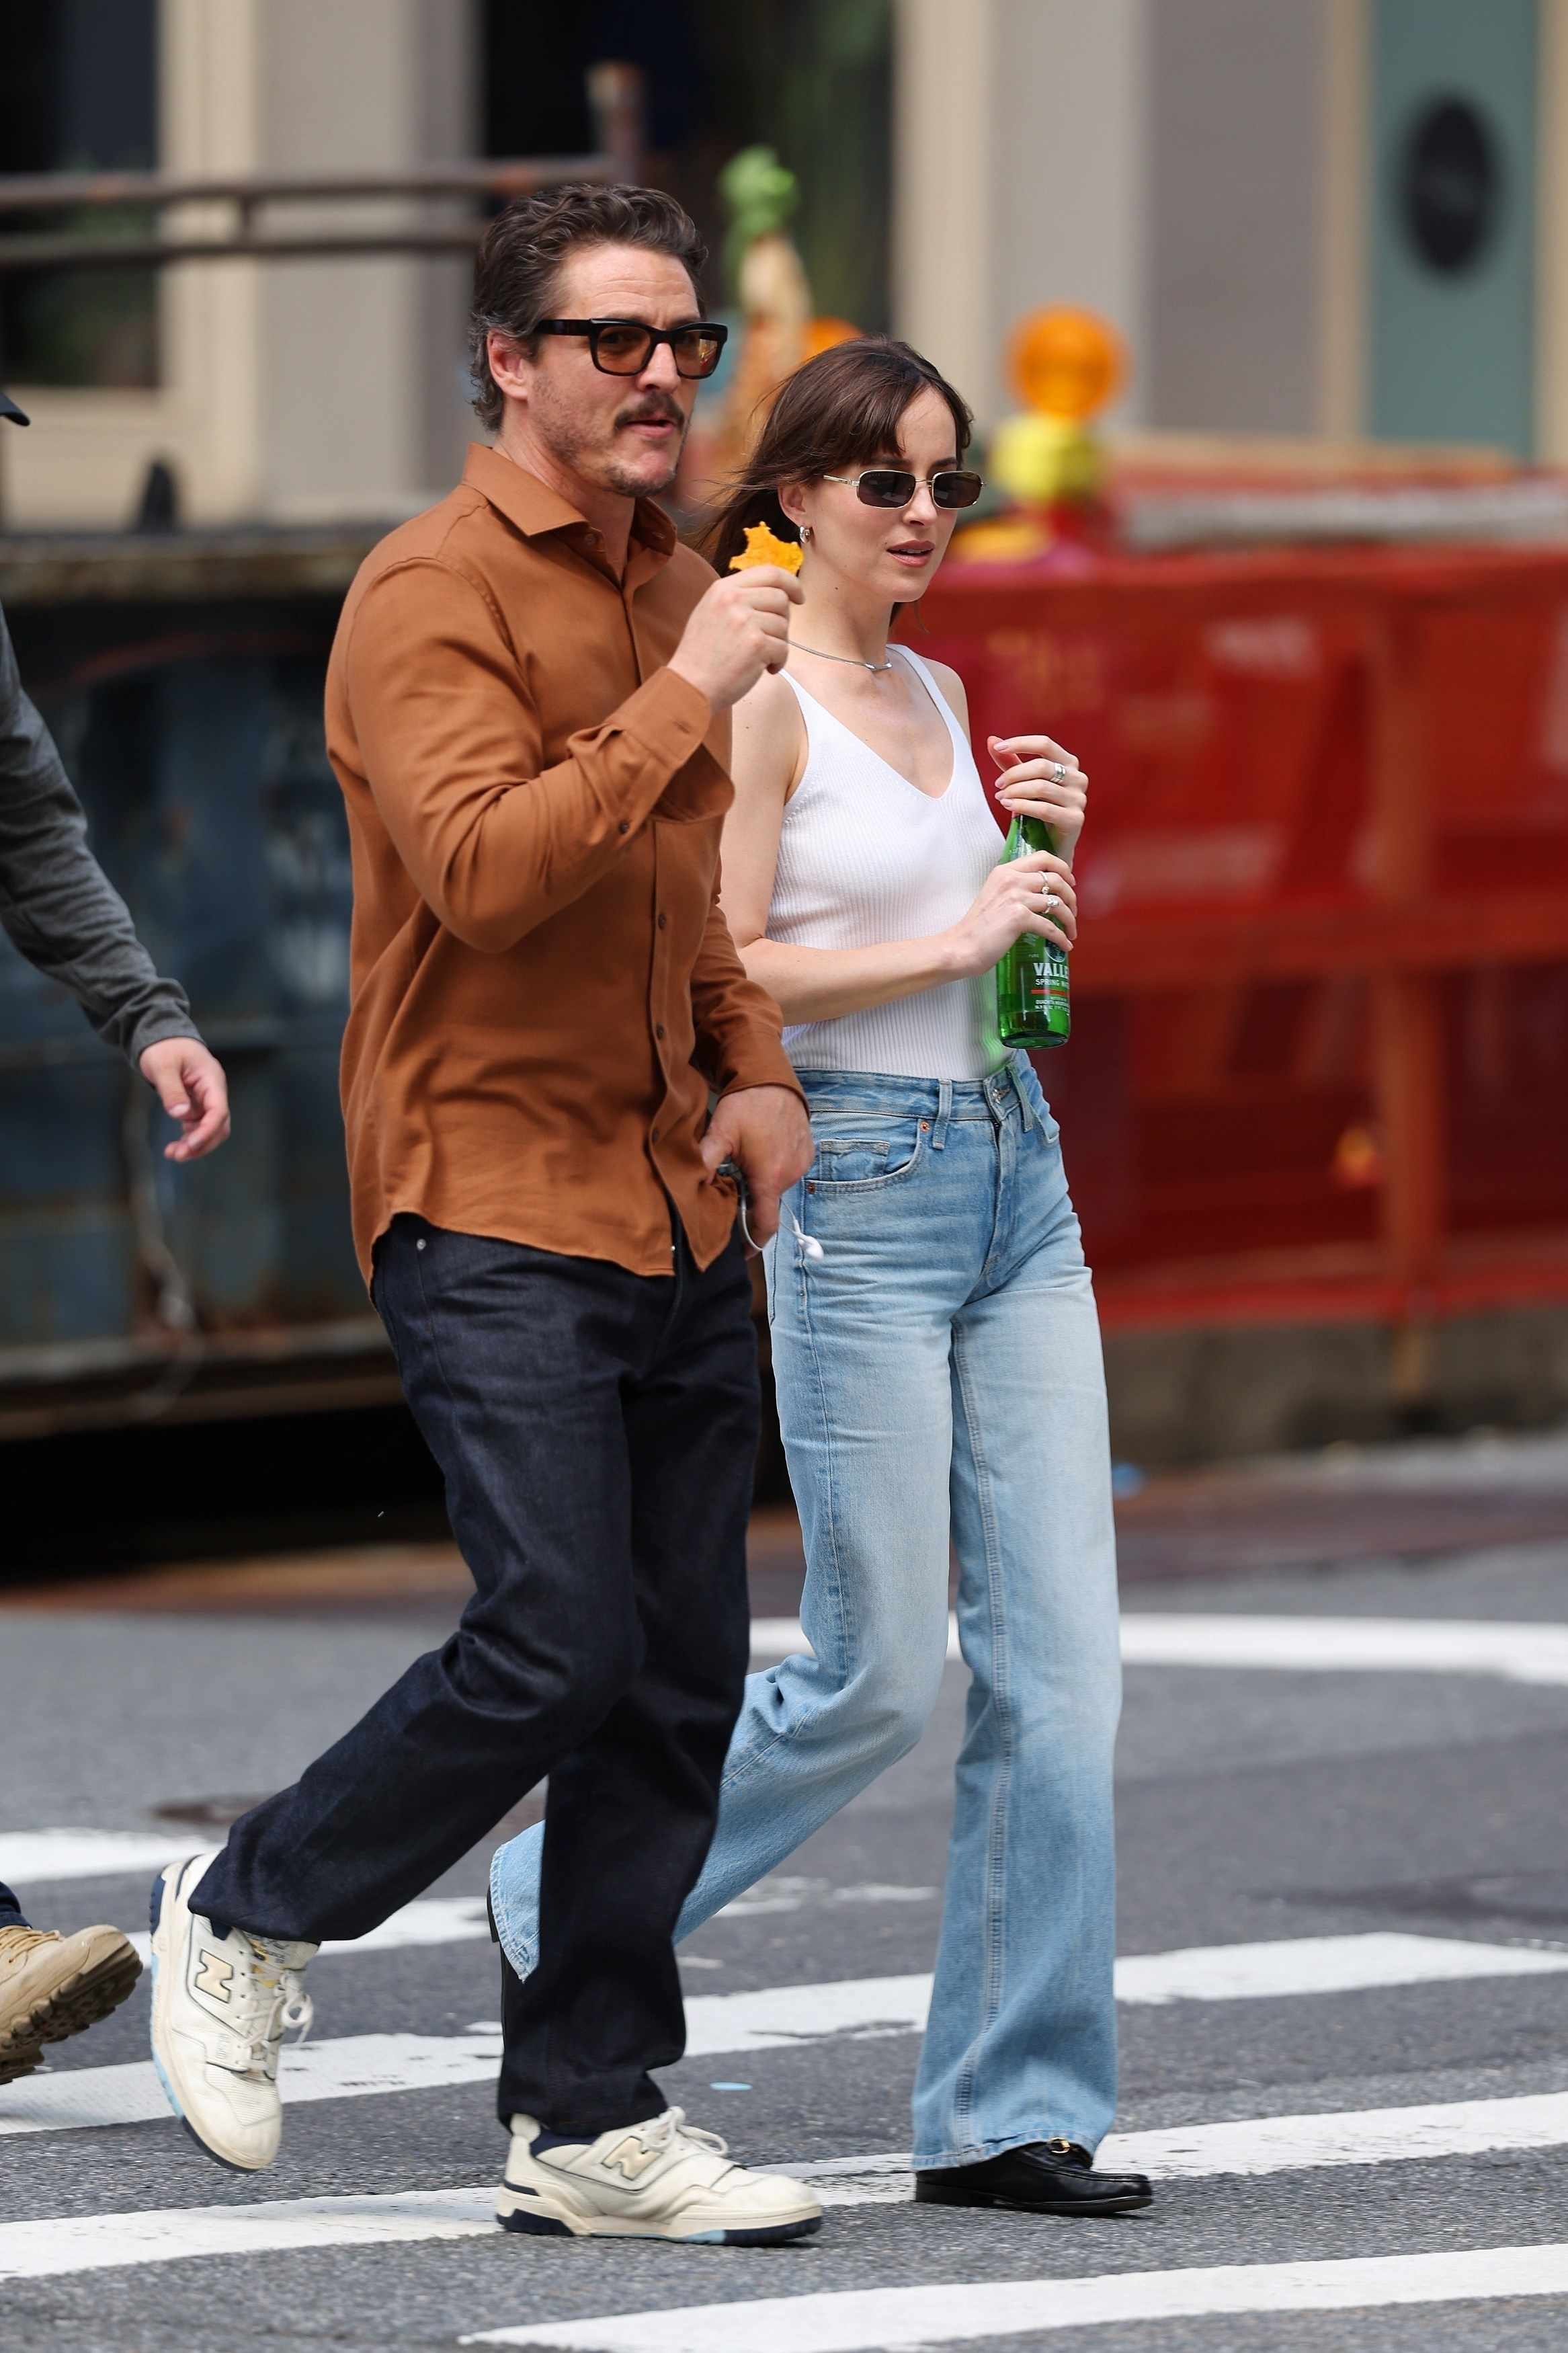 Pedro Pascal wears sunglasses, a red shirt, black pants and white ALD New Balance sneakers with Dakota Johnson, who wears black sunglasses, a white top, blue jeans, and loafers